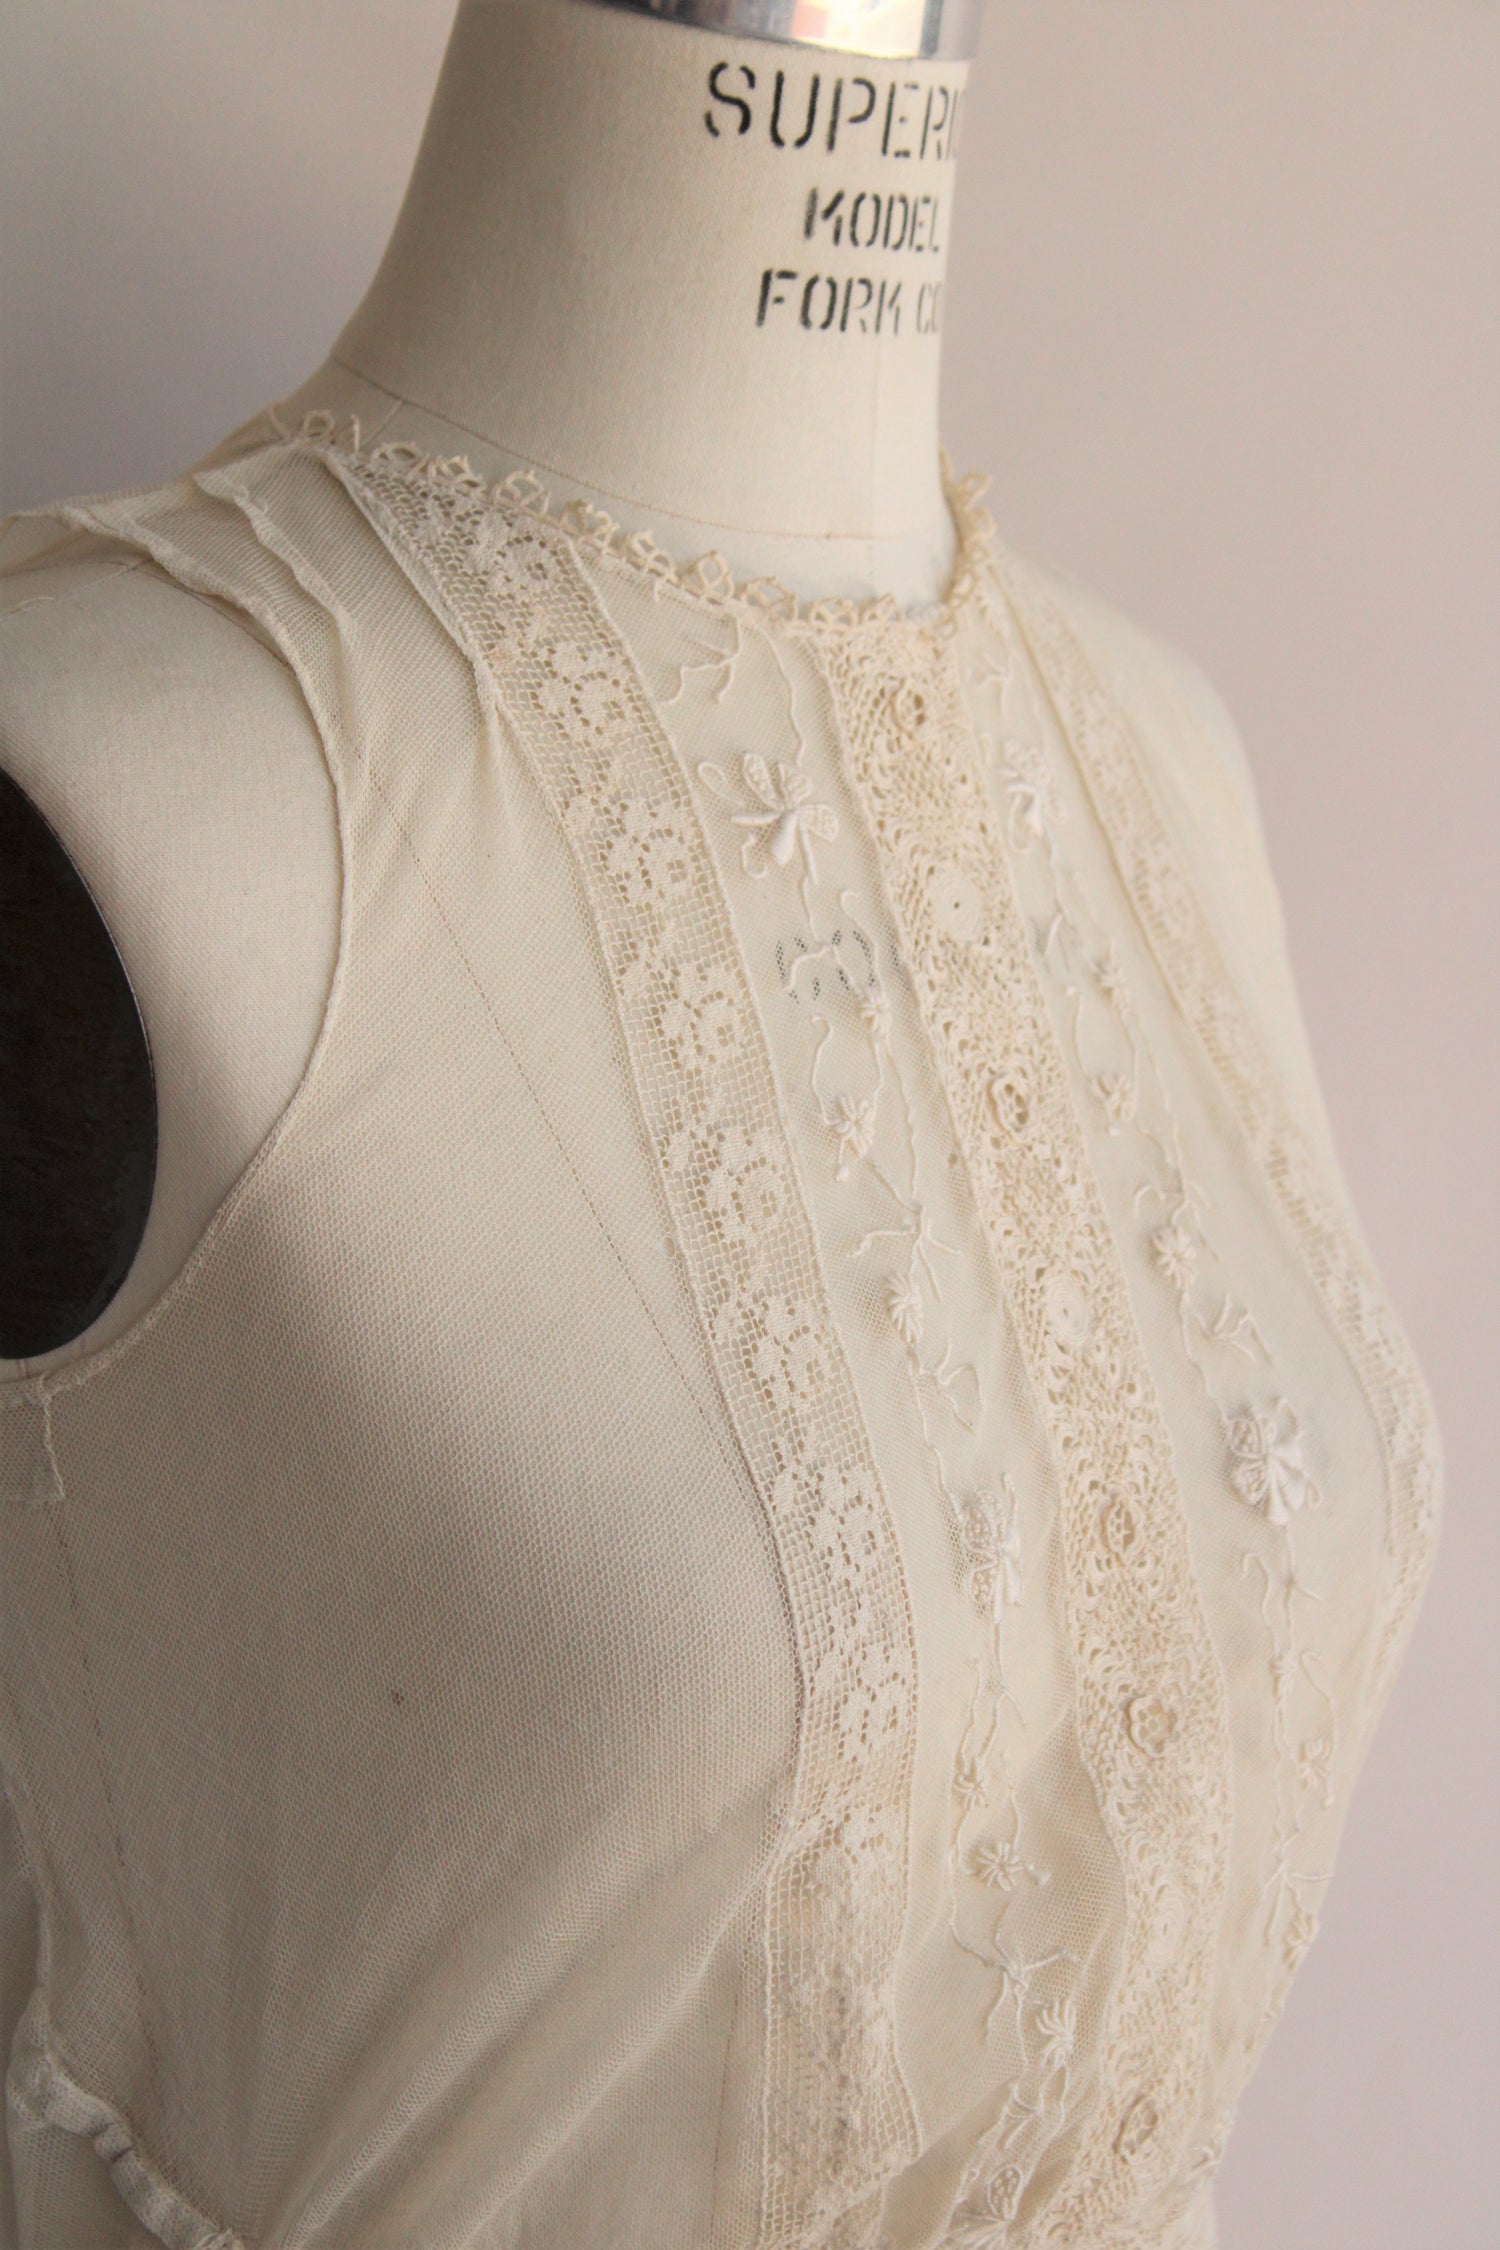 Vintage 1910s Sheer Mesh and Lace Blouse